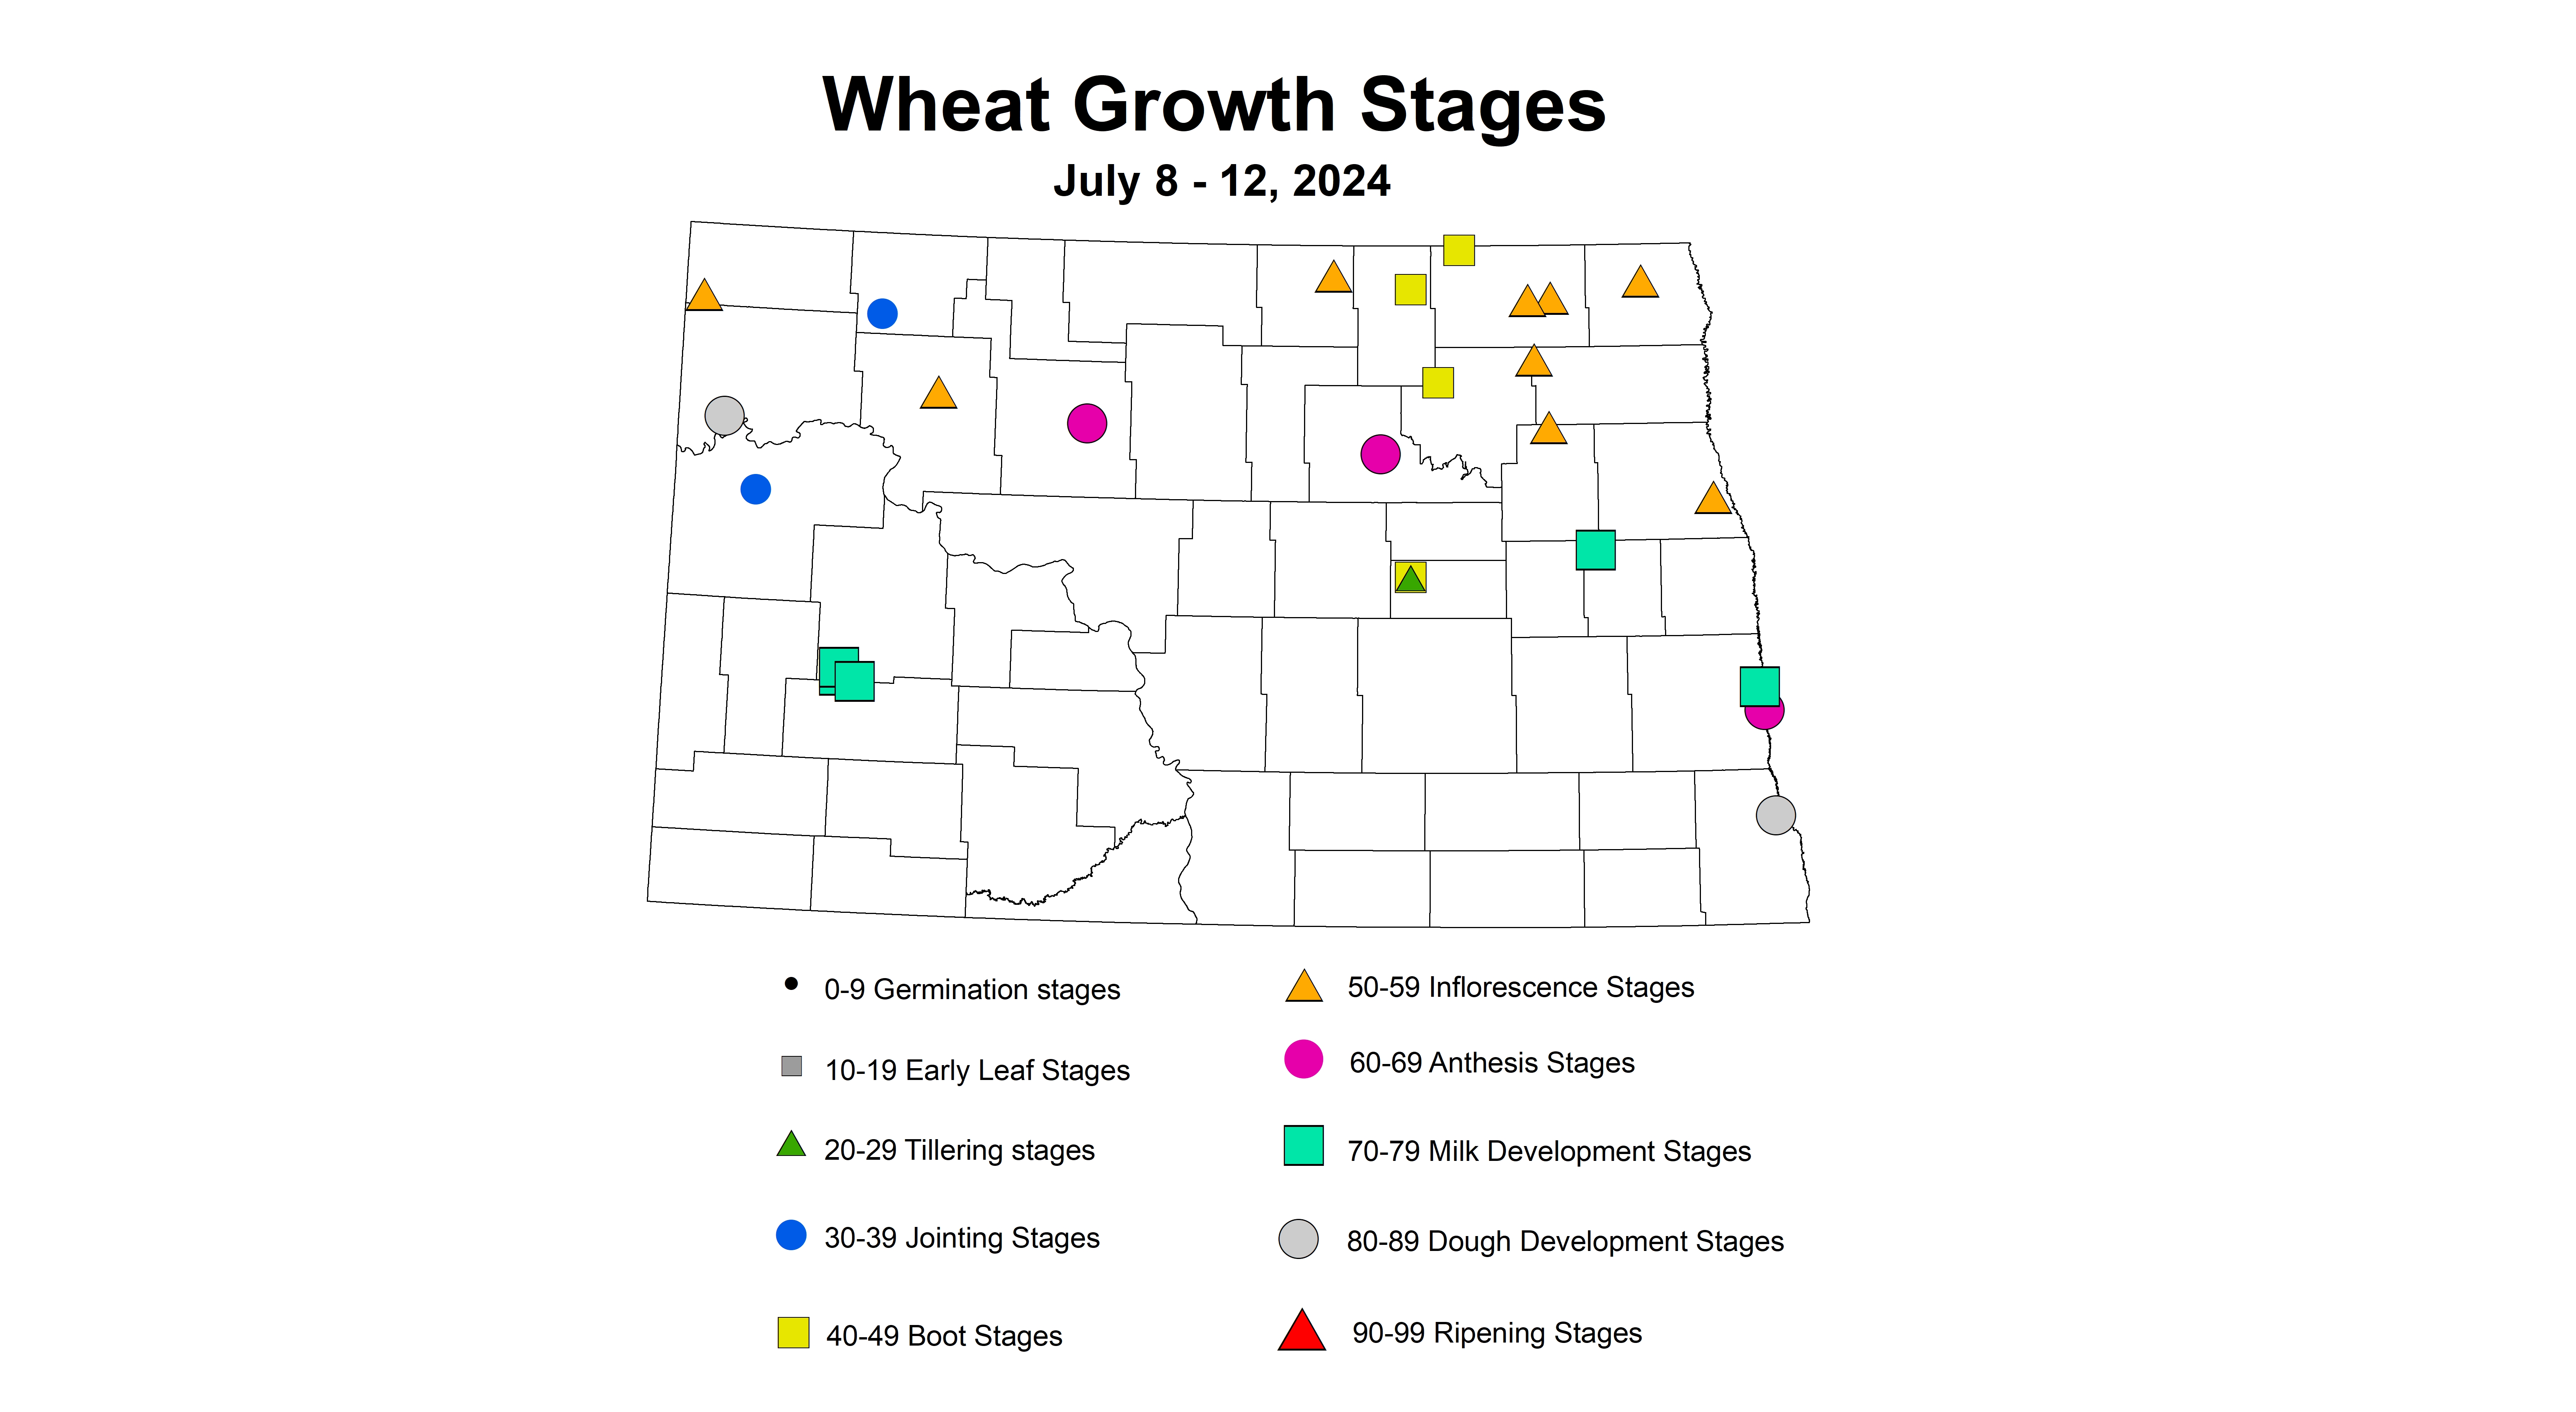 wheat growth stages 7.8-7.12 2024